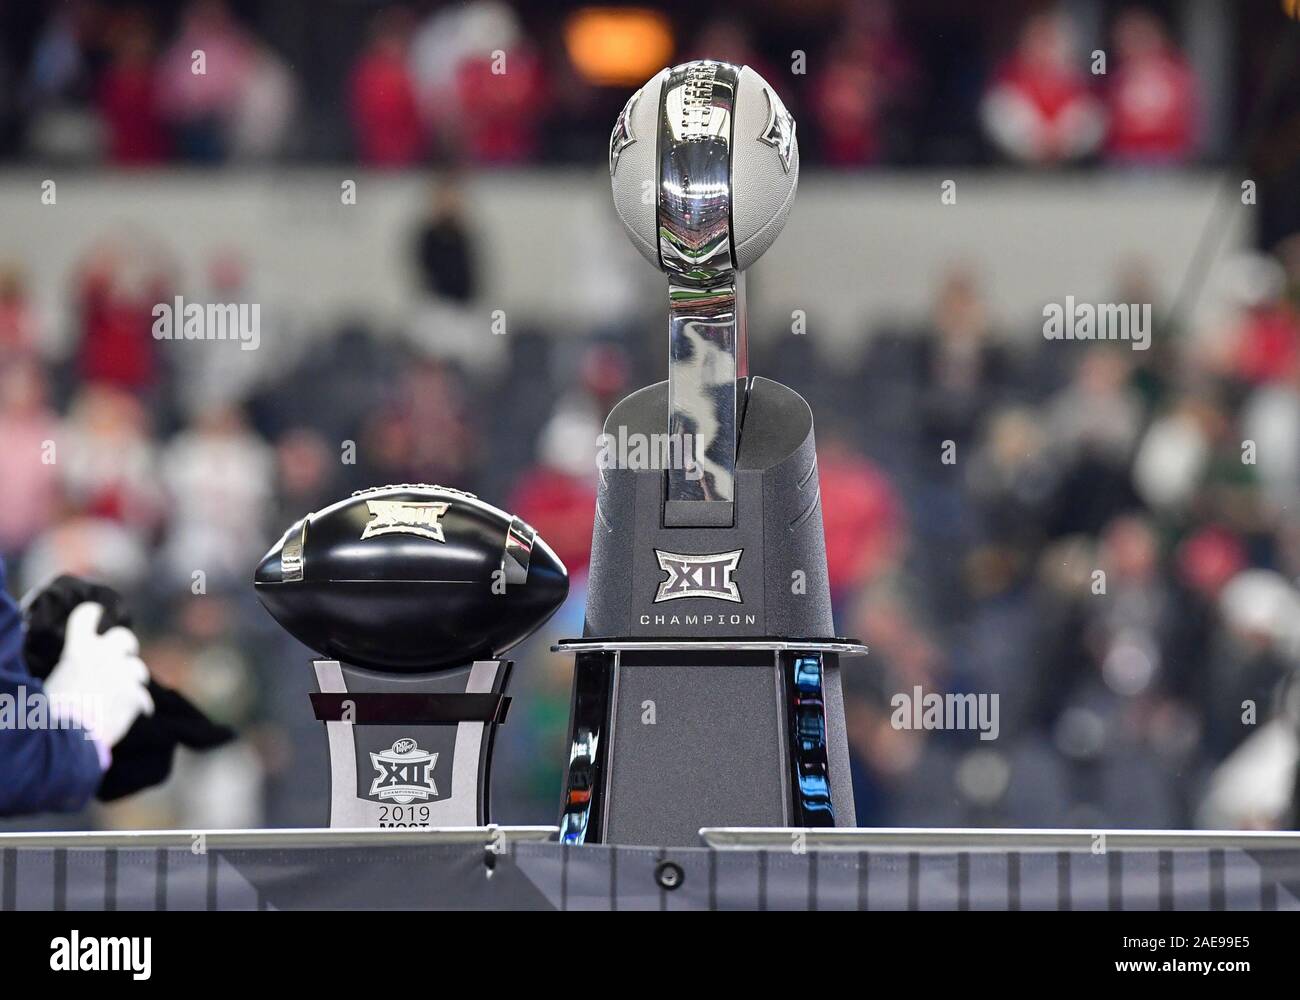 New Big 12 Championship trophy made in Oklahoma